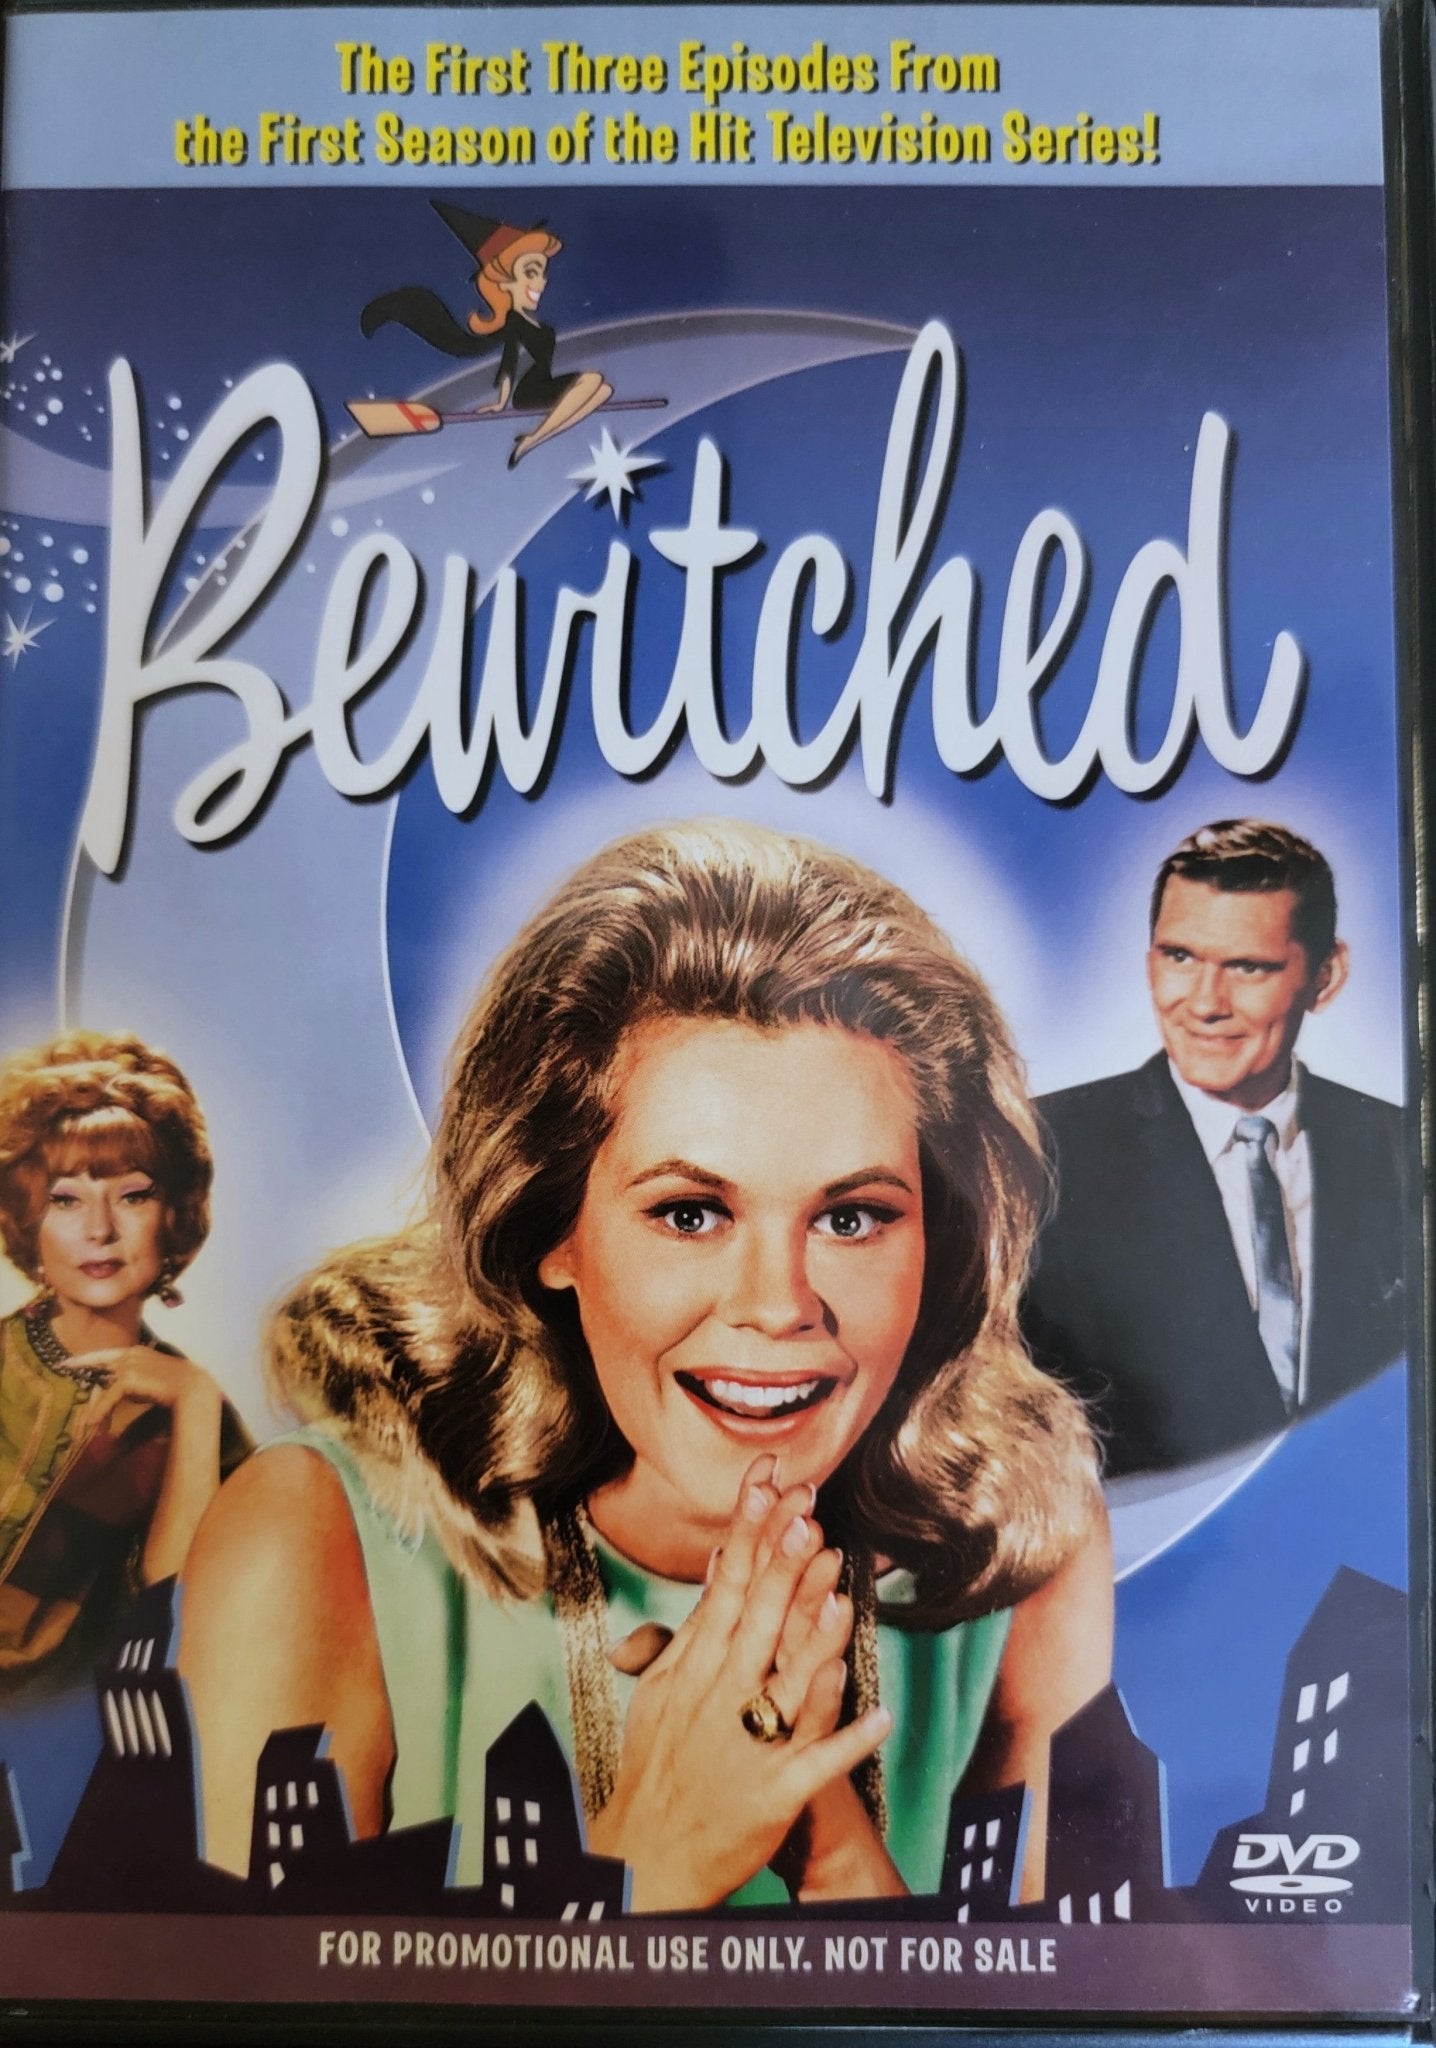 Sony Pictures Home Entertainment - Bewitched - 1st Three Episodes | DVD | Television Series - DVD - Steady Bunny Shop